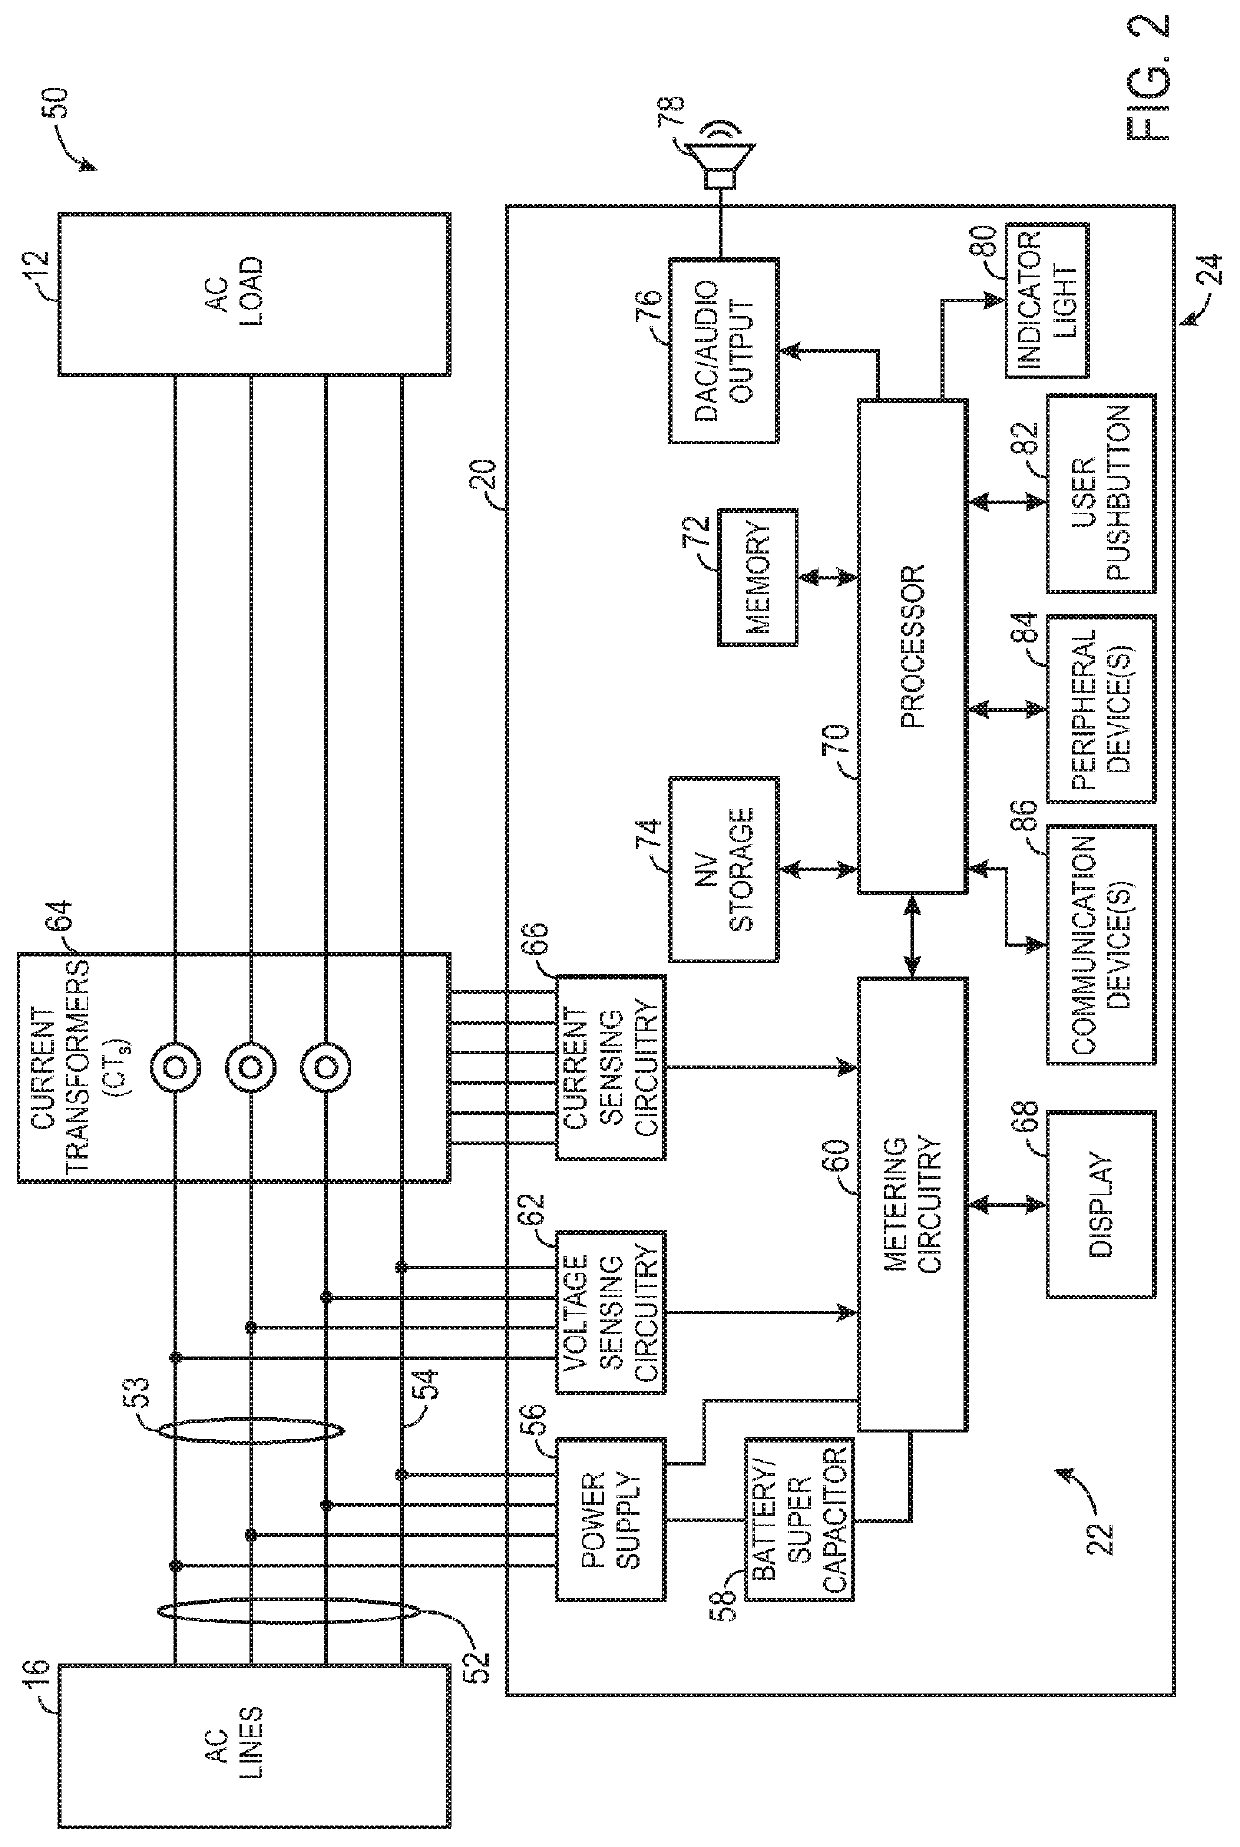 Power consumption compliance monitoring system and method